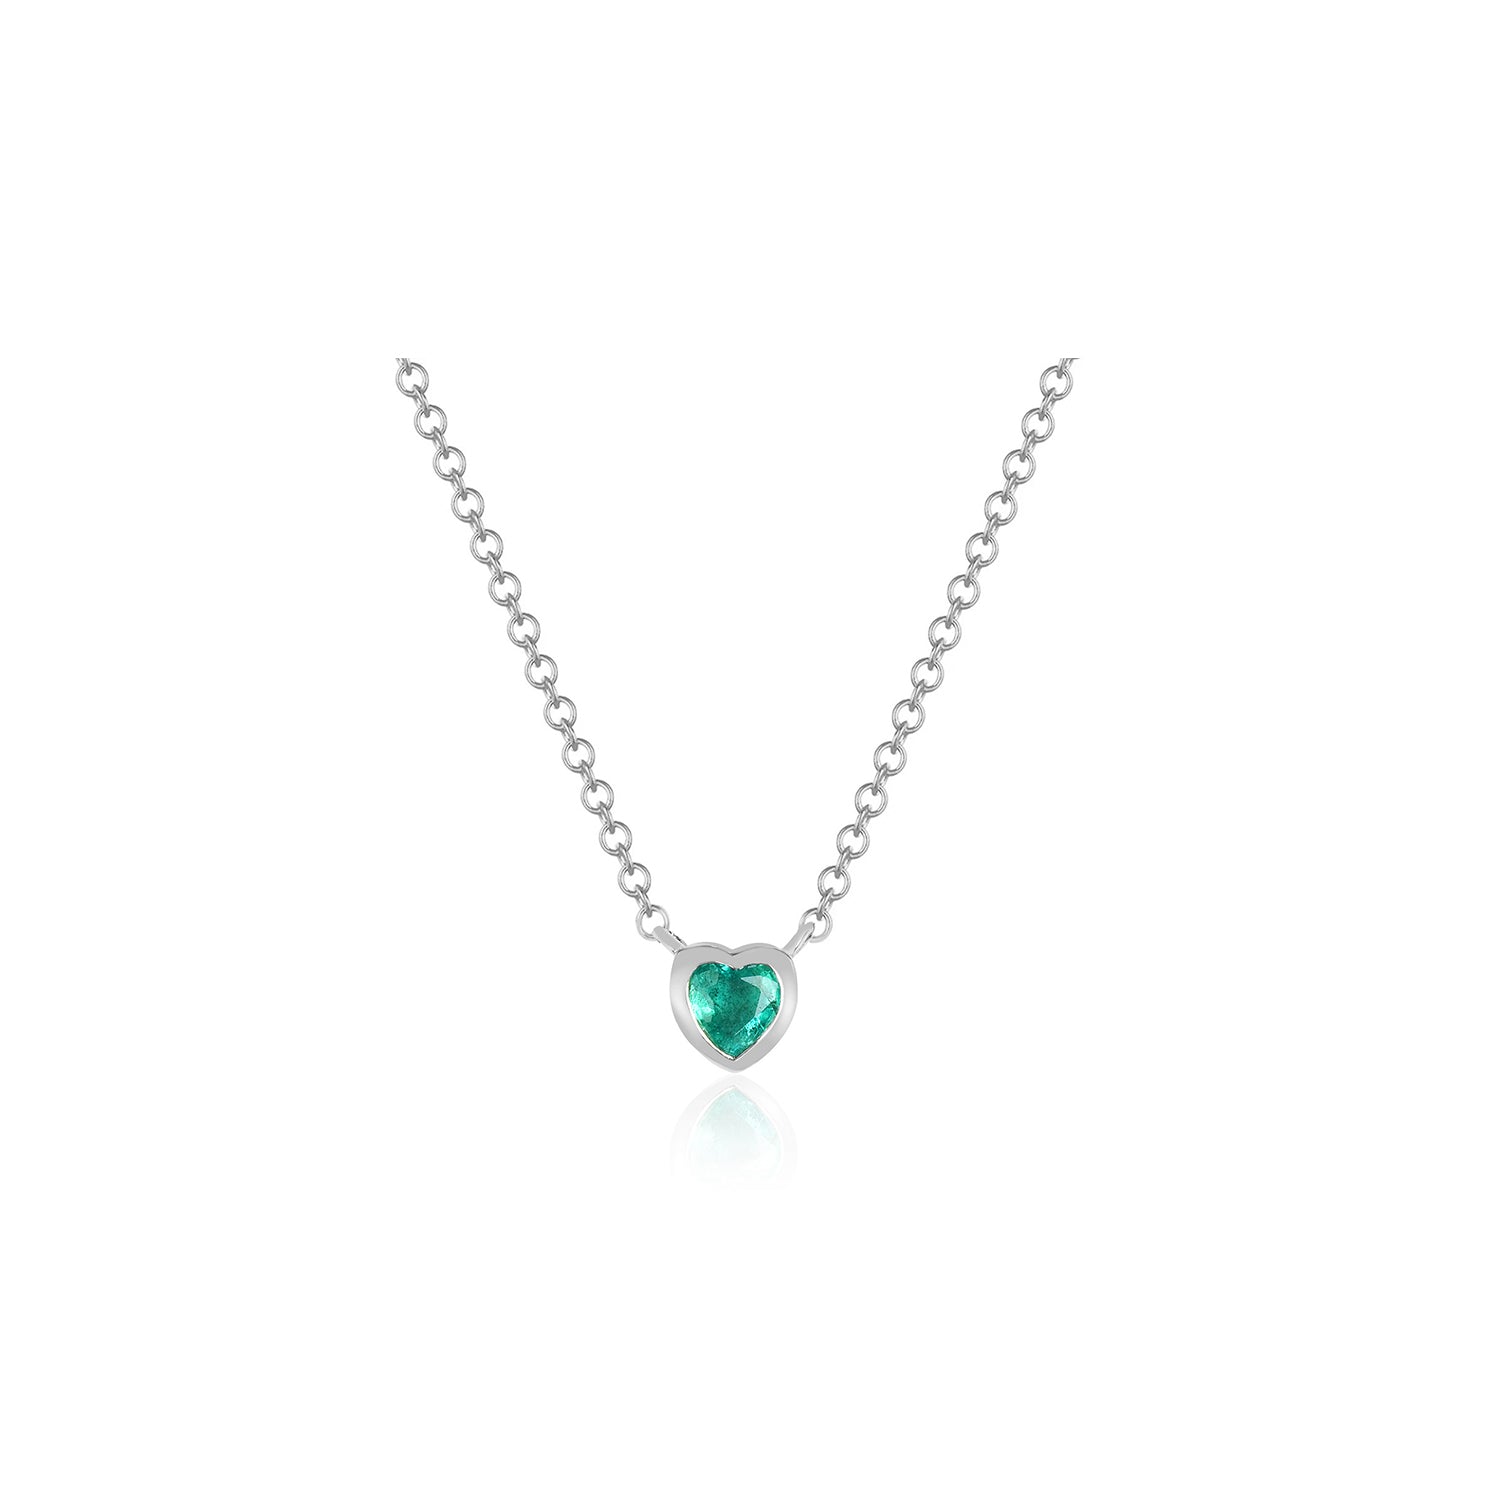 Emerald Heart Necklace in 14k white gold